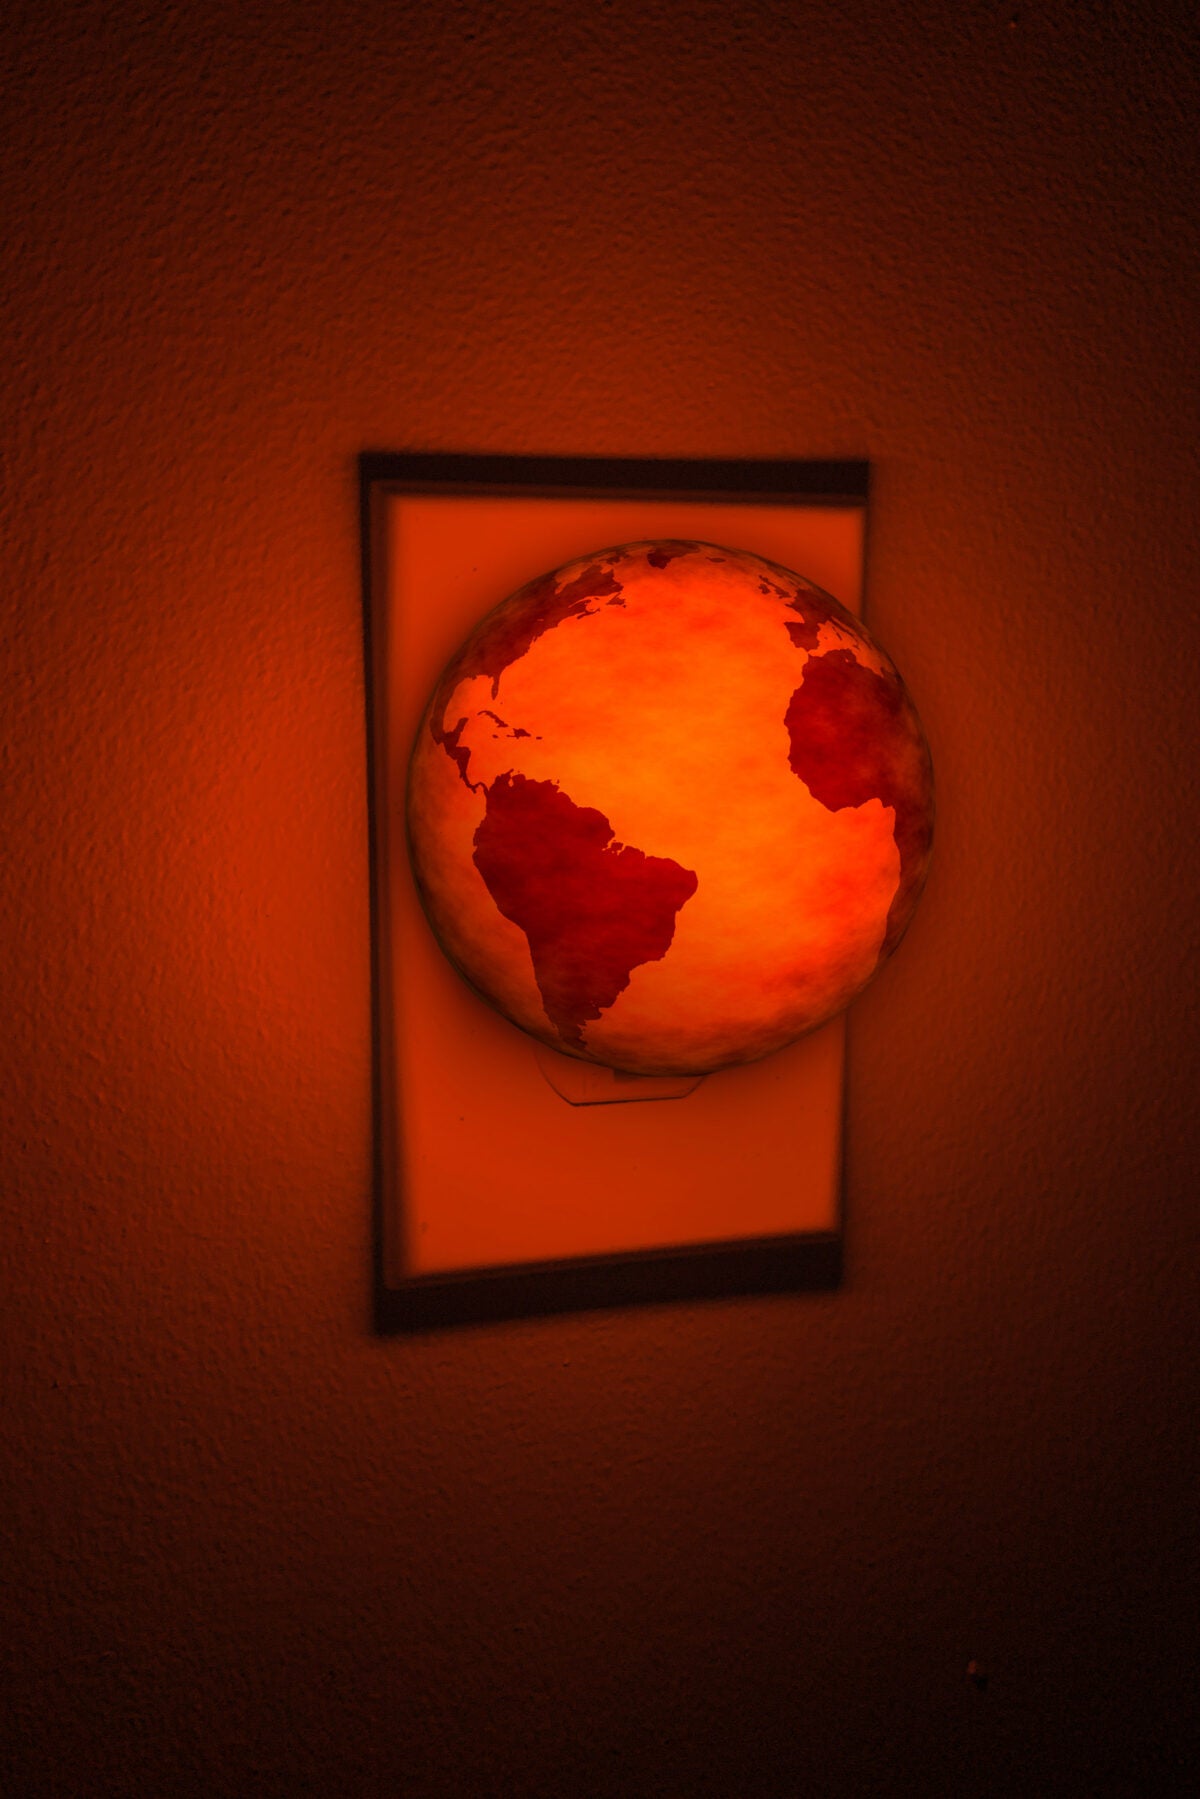 Photo illustration: A red-orange glowing earth acts as a nightlight in a room. The light emits a bright red-orange glow.